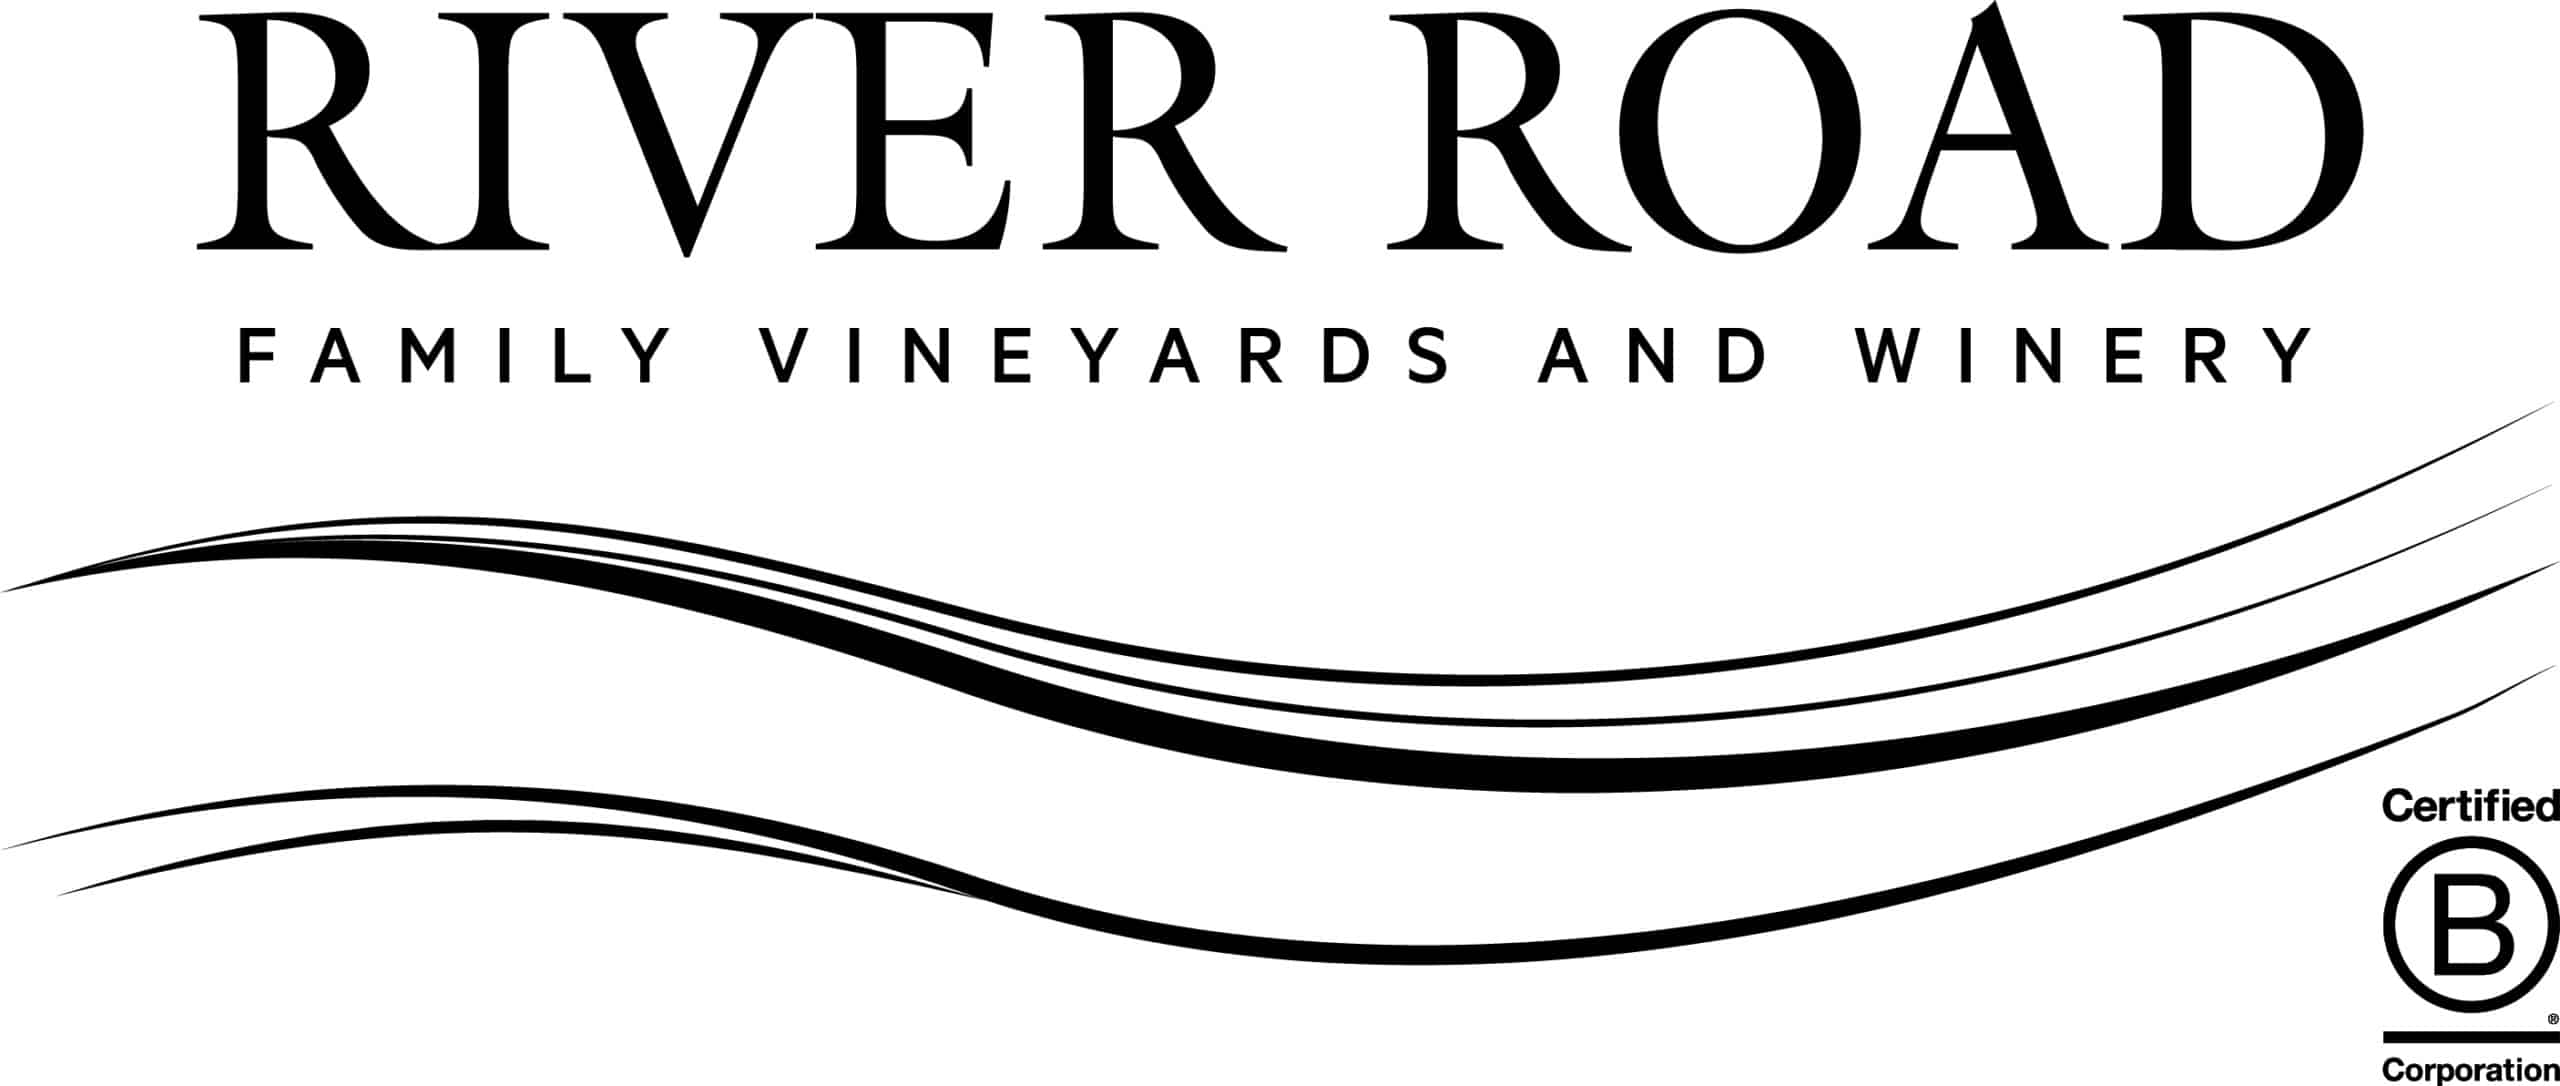 River Road Family Vineyards and Winery logo